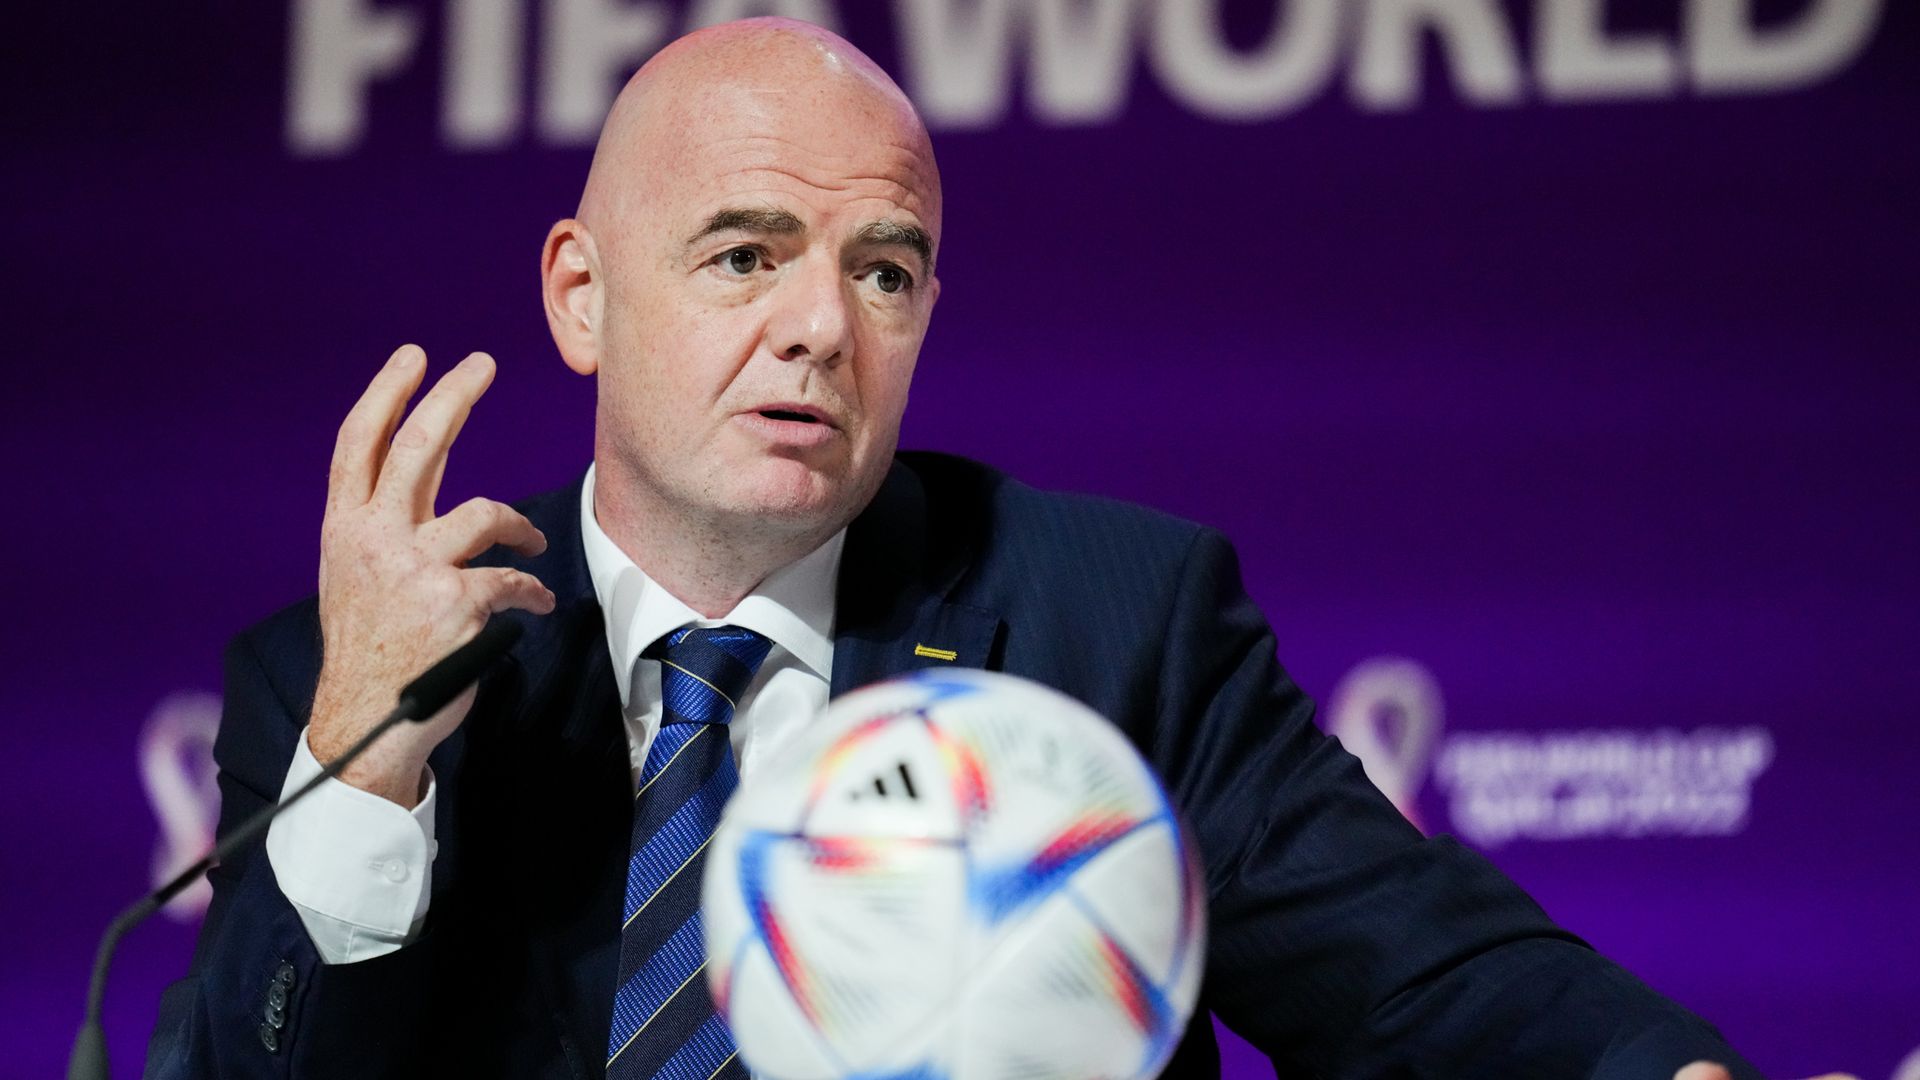 Infantino accuses west of hypocrisy | Speech ‘deceptive and offensive’SkySports | Information